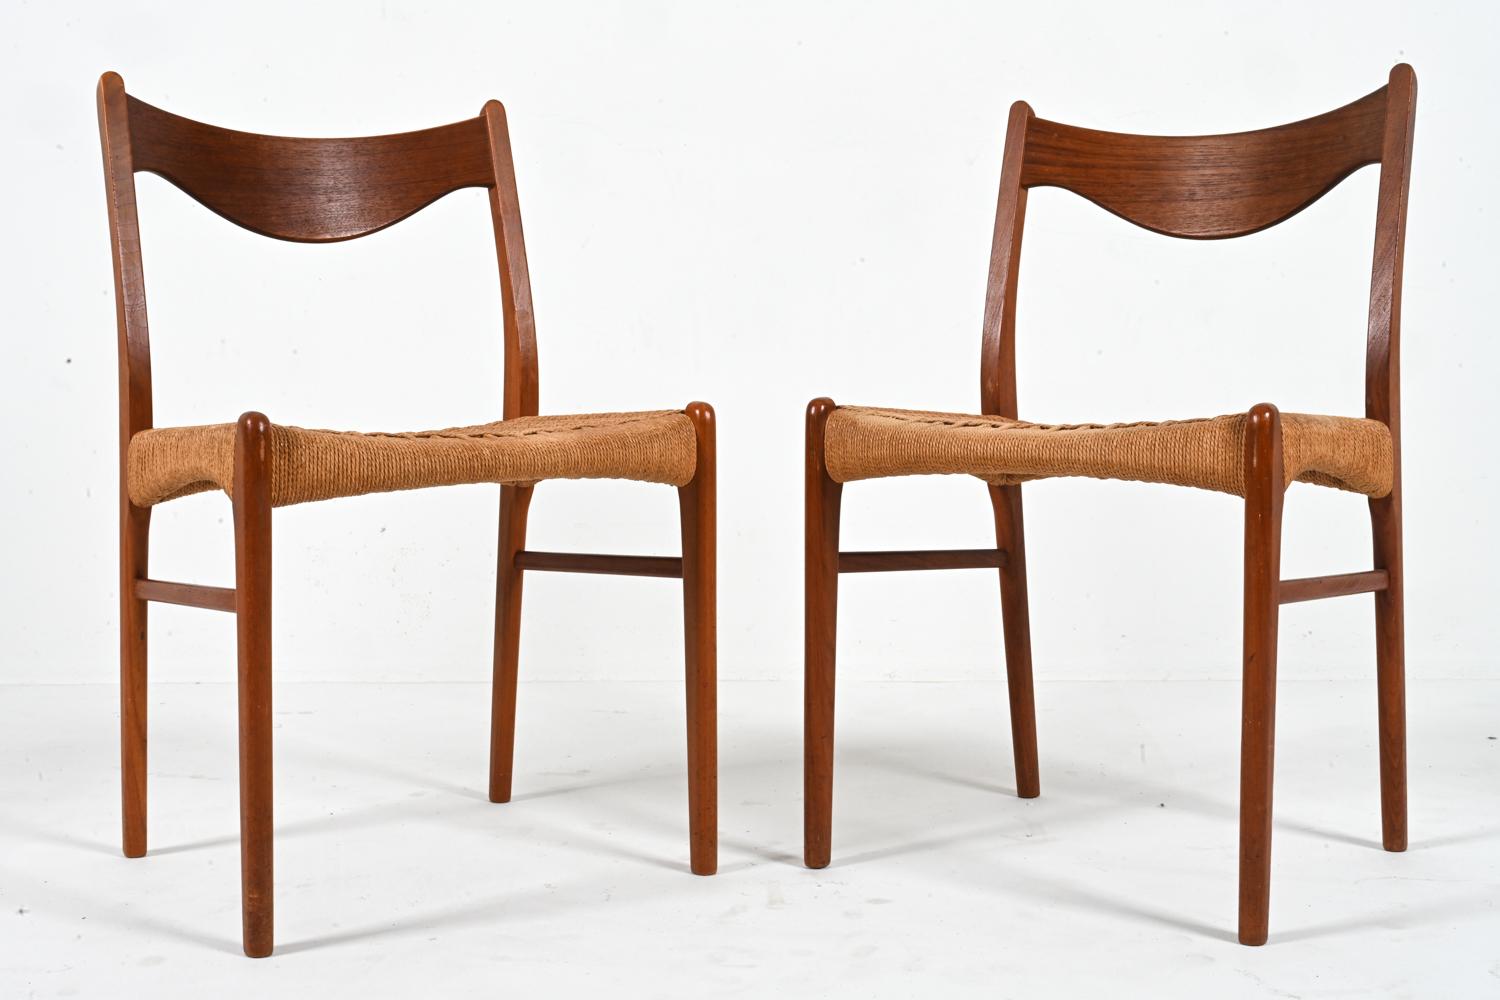 '6' Teak & Papercord Dining Chairs by Arne Wahl Iversen for Glyngøre Stolefabrik In Good Condition For Sale In Norwalk, CT